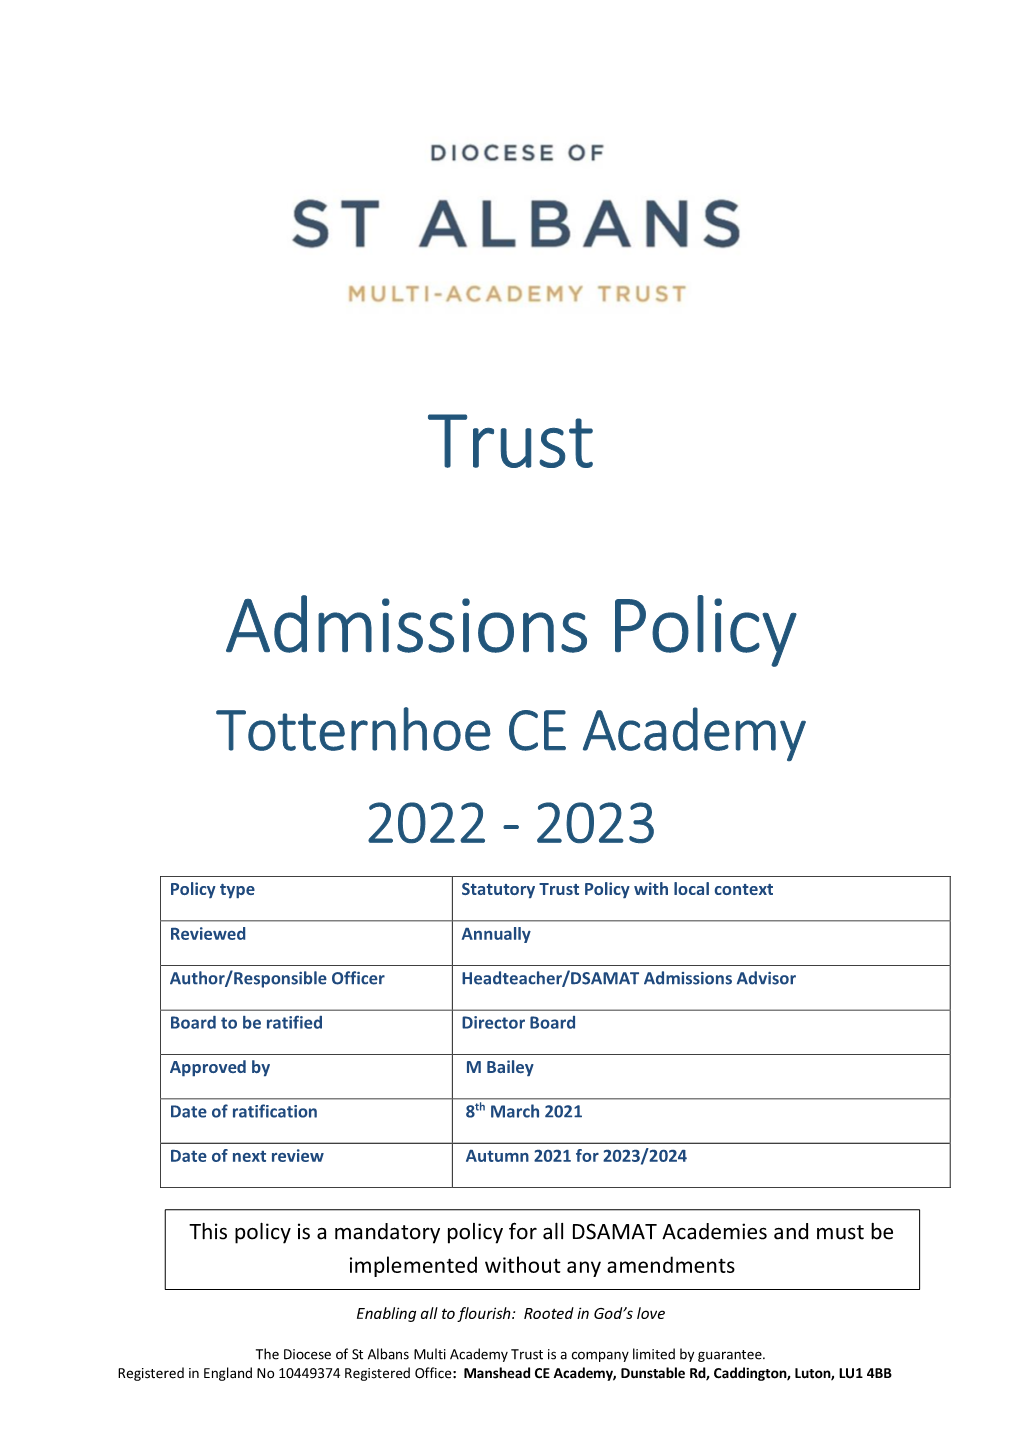 Totternhoe Admission Policy 2022 to 2023